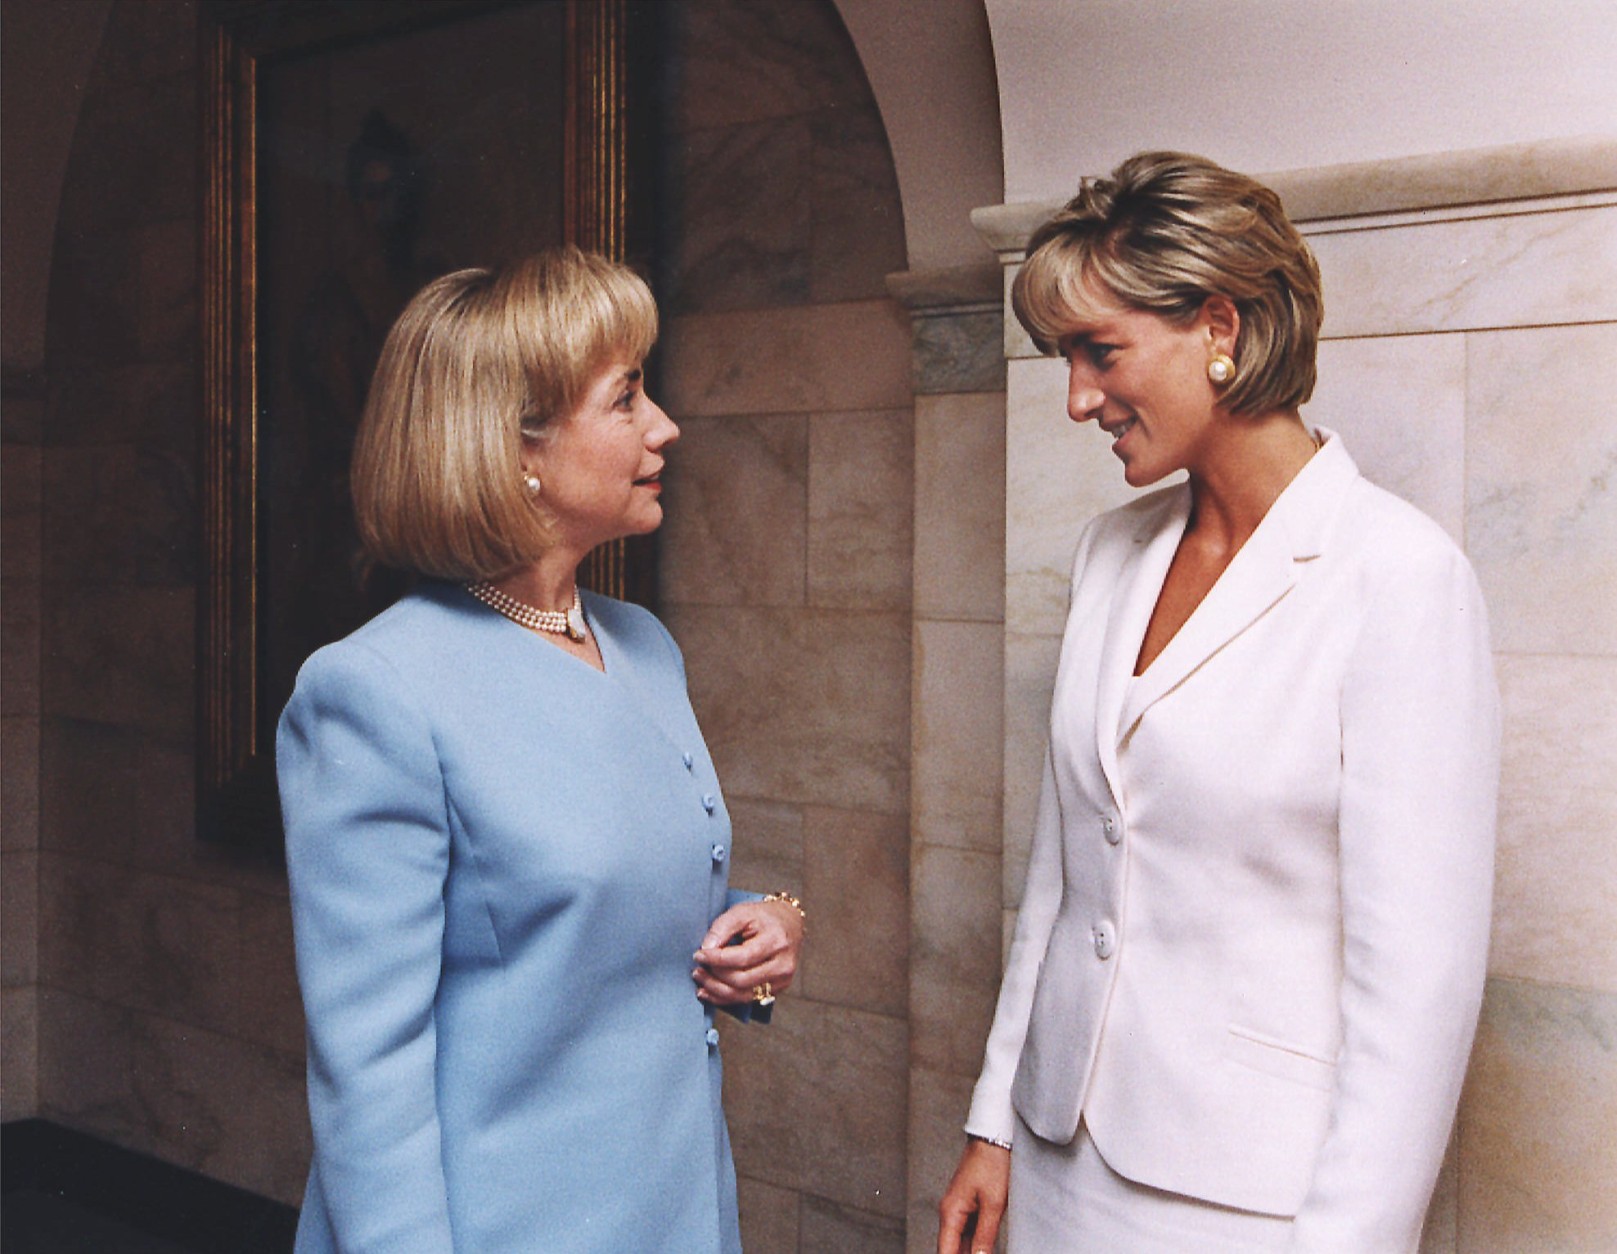 First lady Hillary Rodham Clinton, left, meets with Princess Diana at the White House Wednesday, June 18, 1997. On Tuesday night the princess attended an American Red Cross fund-raiser in Washington to aid land-mine victims around the world. (AP Photo/White House)